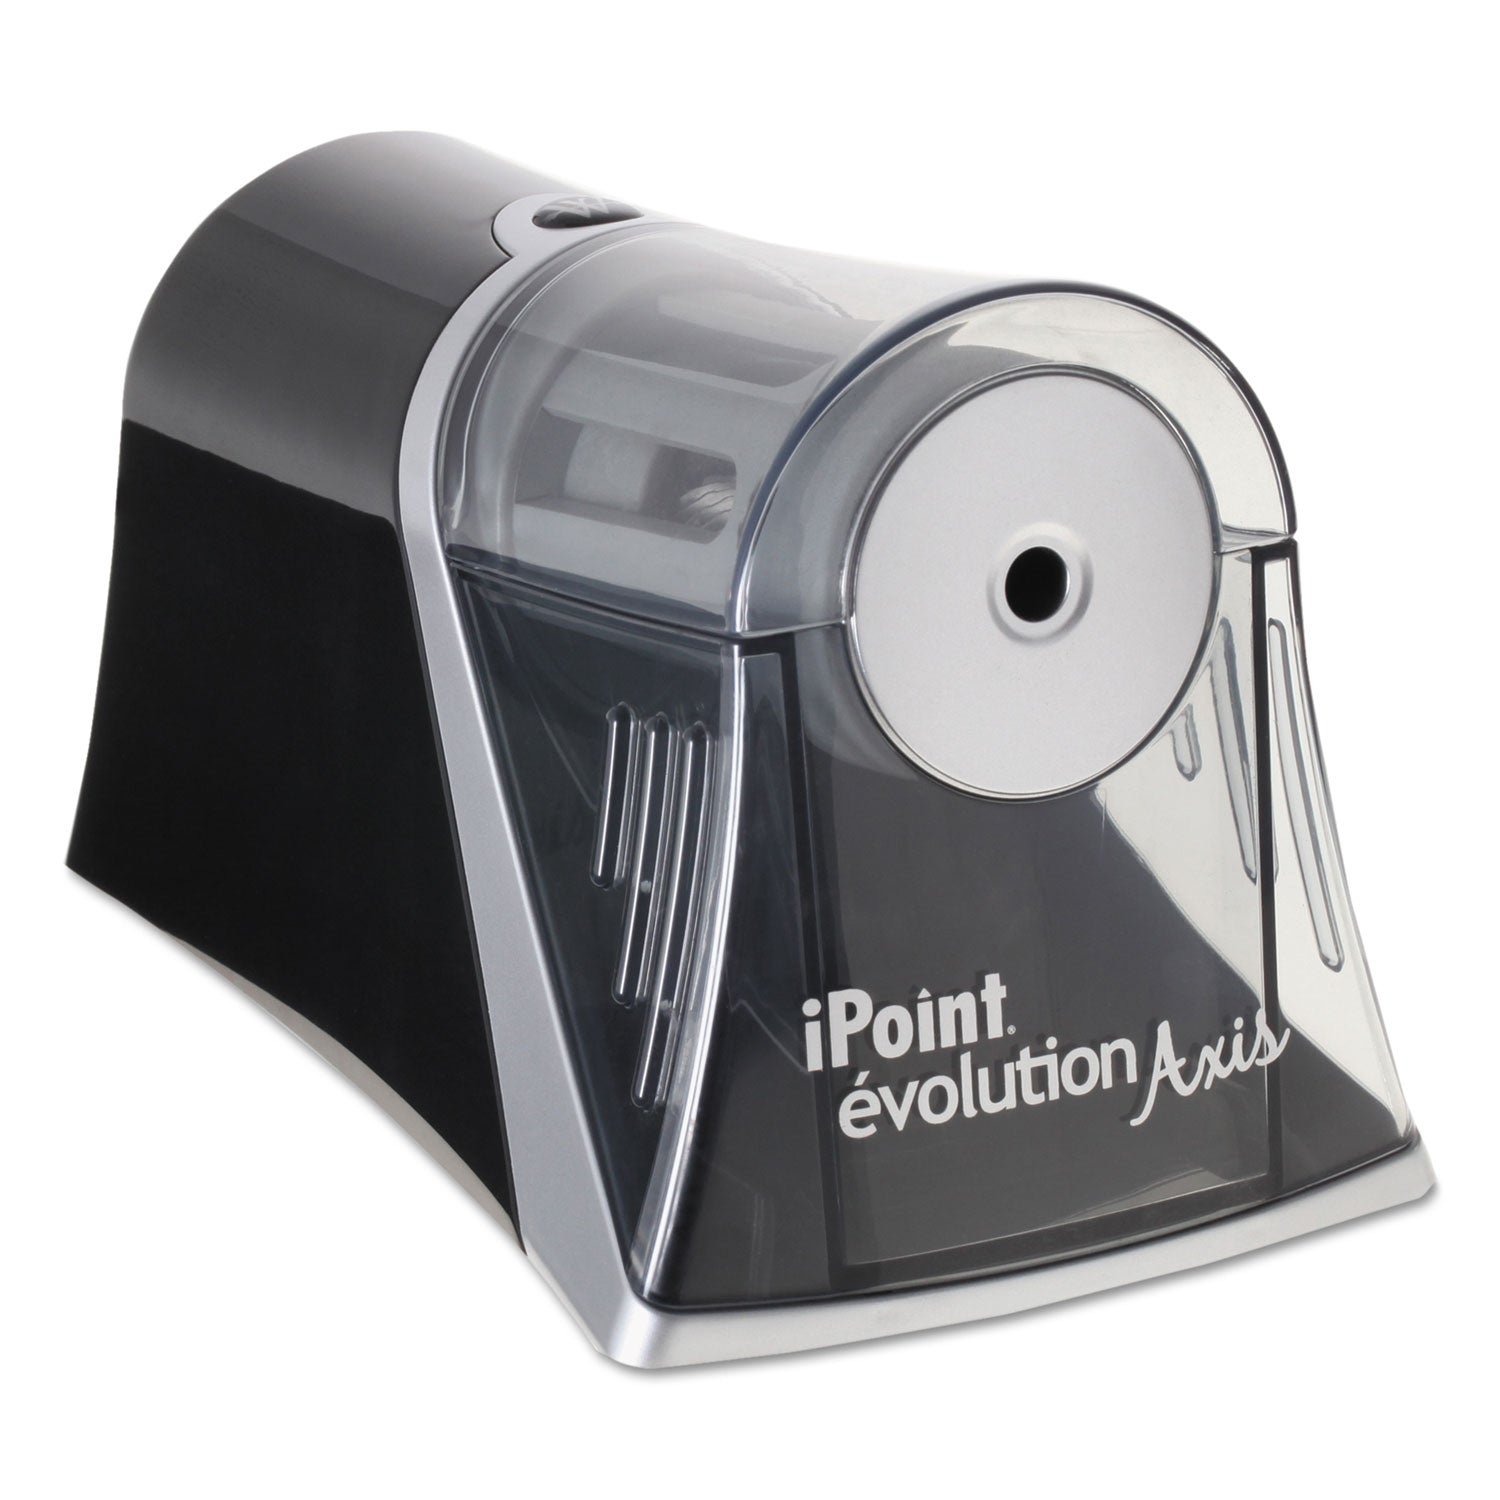 iPoint Evolution Axis Pencil Sharpener, AC-Powered, 4.25 x 7 x 4.75, Black/Silver - 